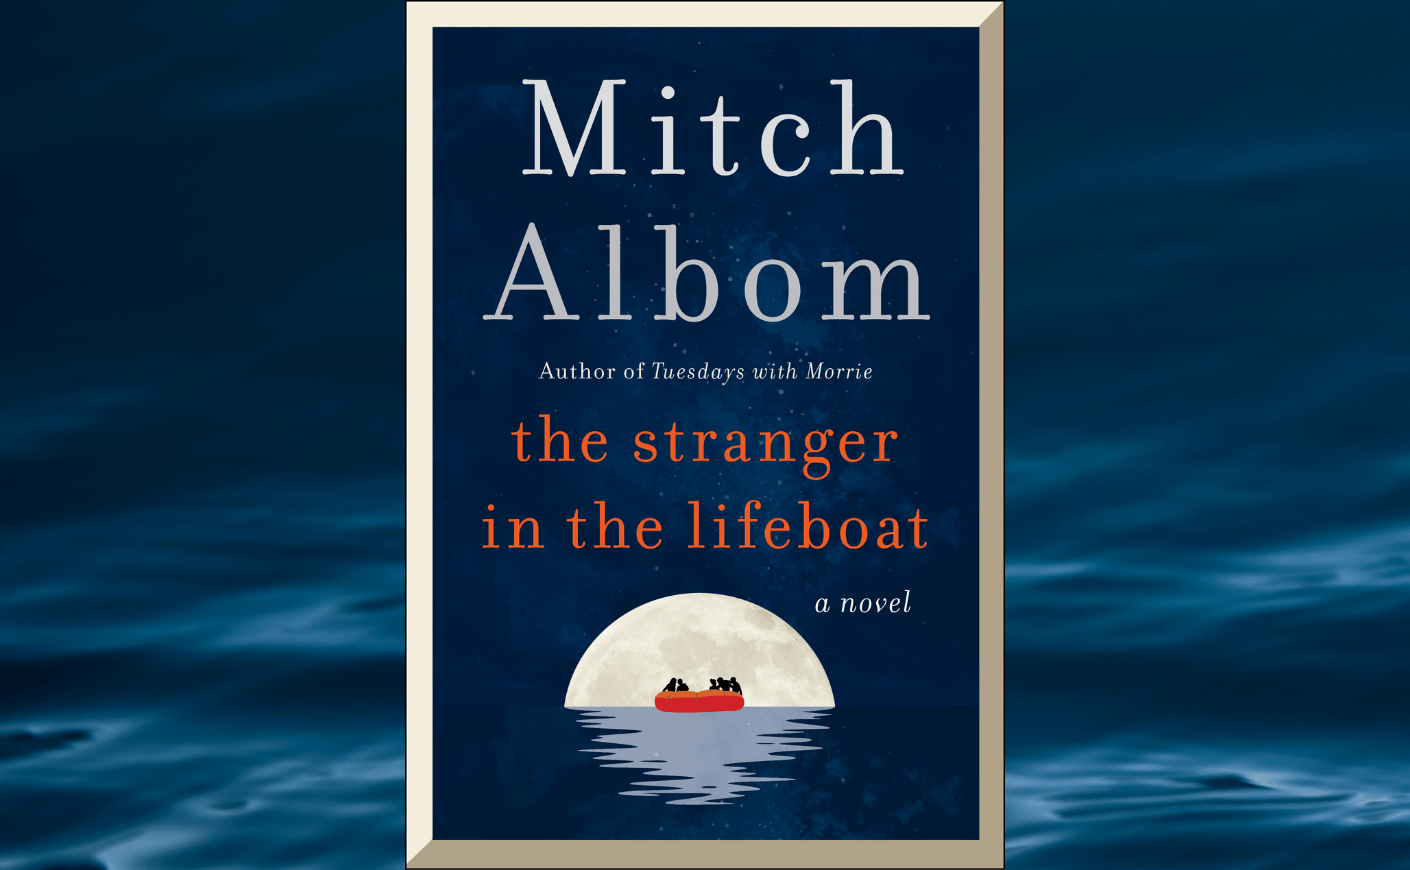 Read an Excerpt From Mitch Albom's New Book, 'The Stranger in the